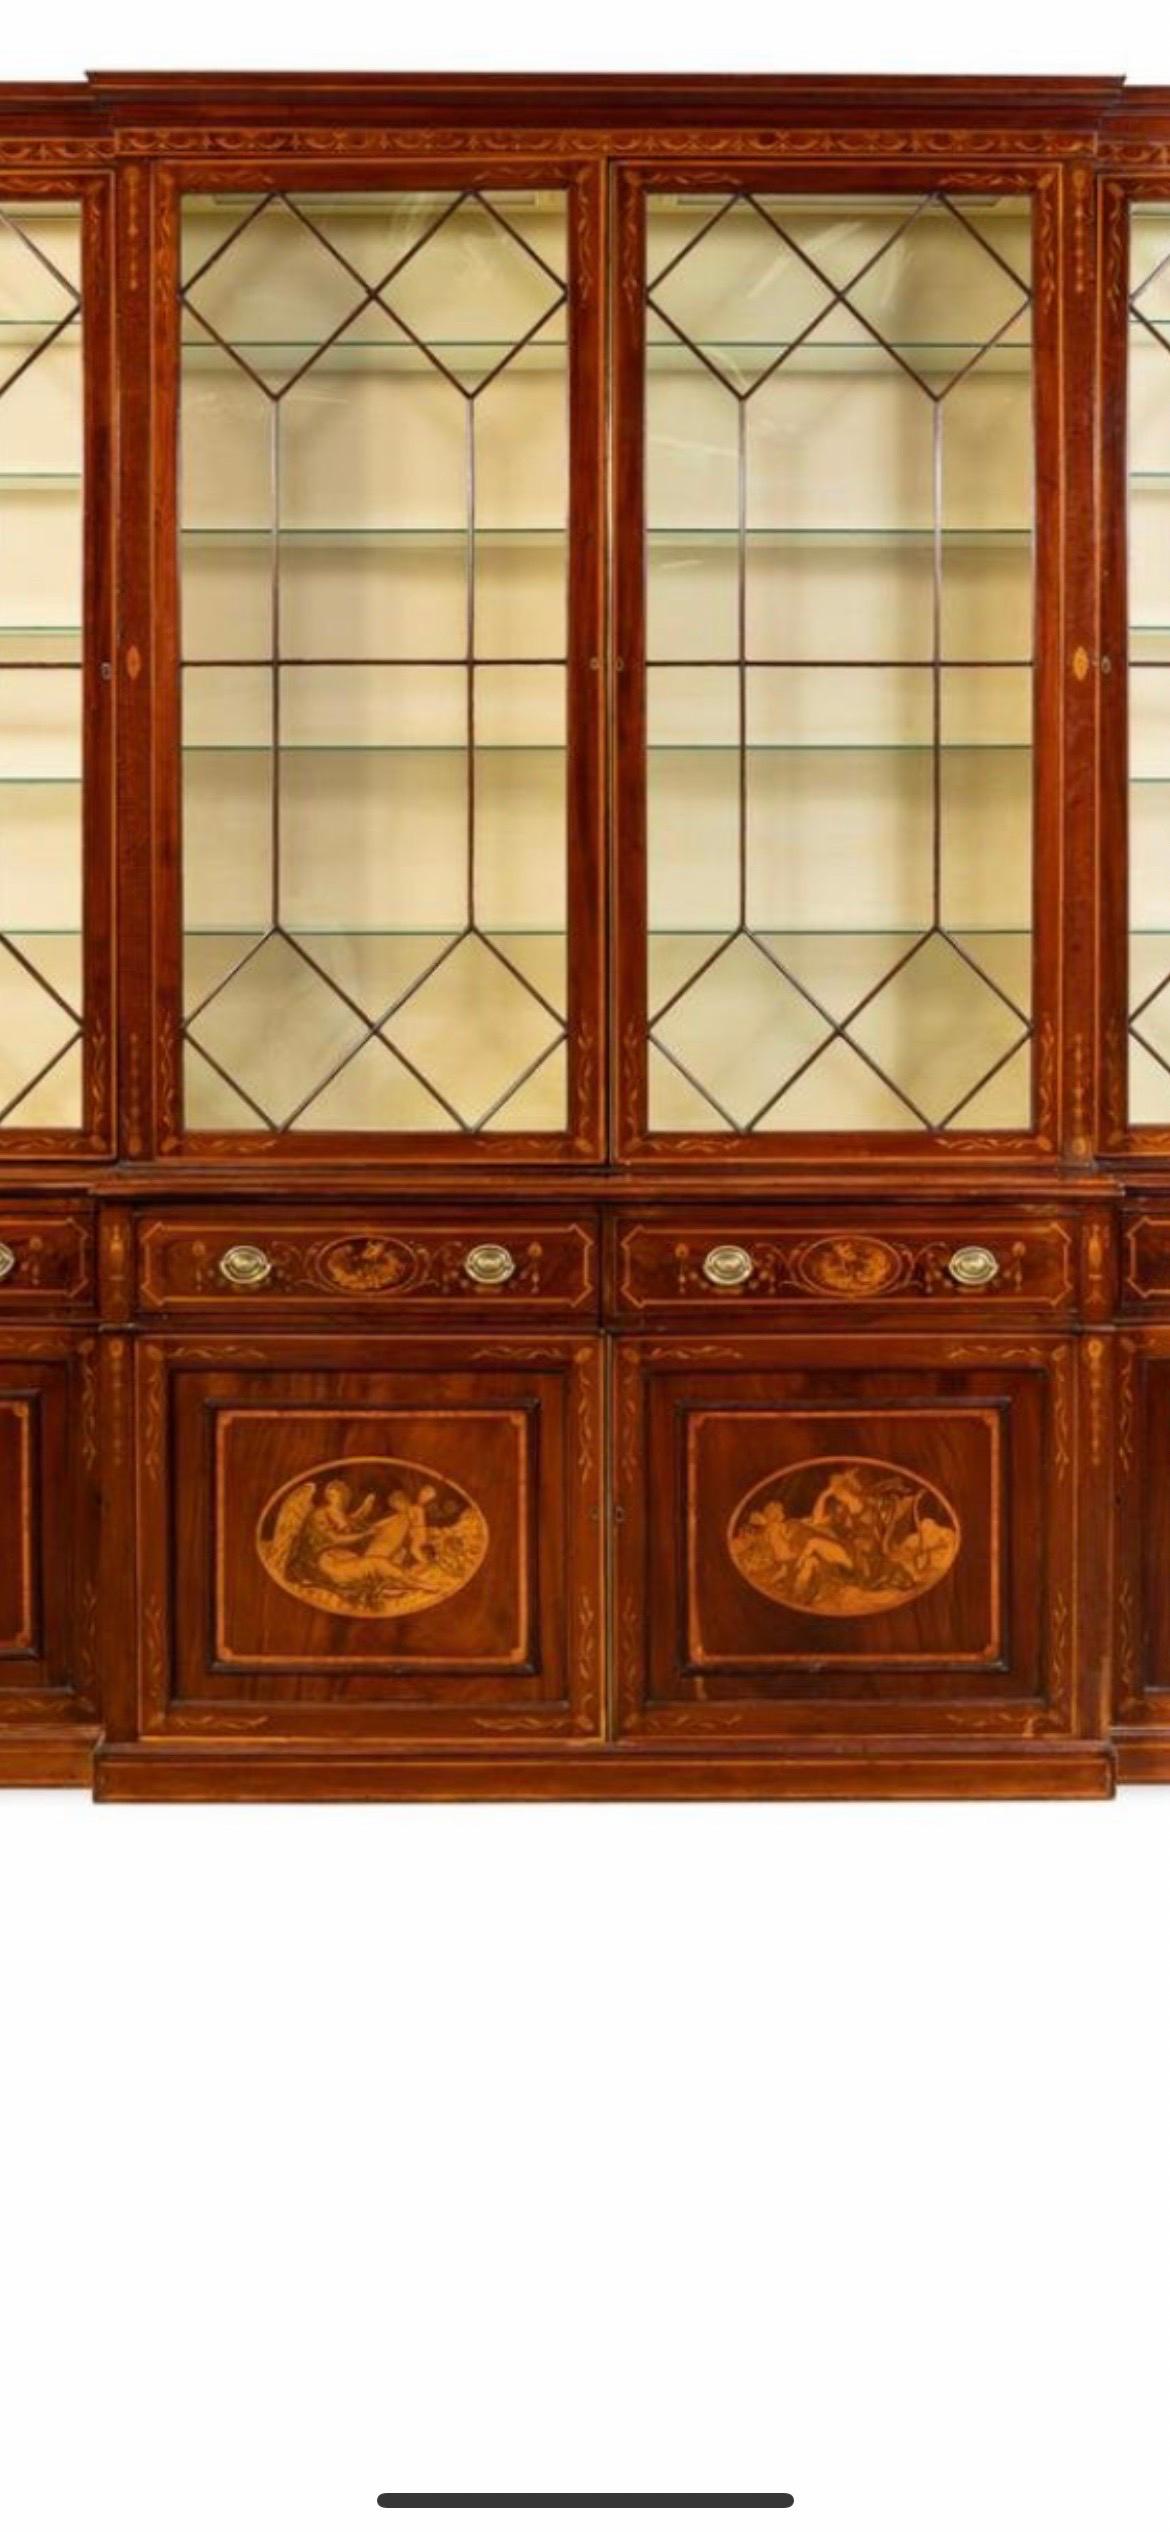 English, early 19th century, monumental mahogany and mahogany veneered marquetry inlaid Georgian breakfront cabinet having a shaped cornice above four astragal glazed doors, with four doors below having mythological scenes and musical trophies, on a